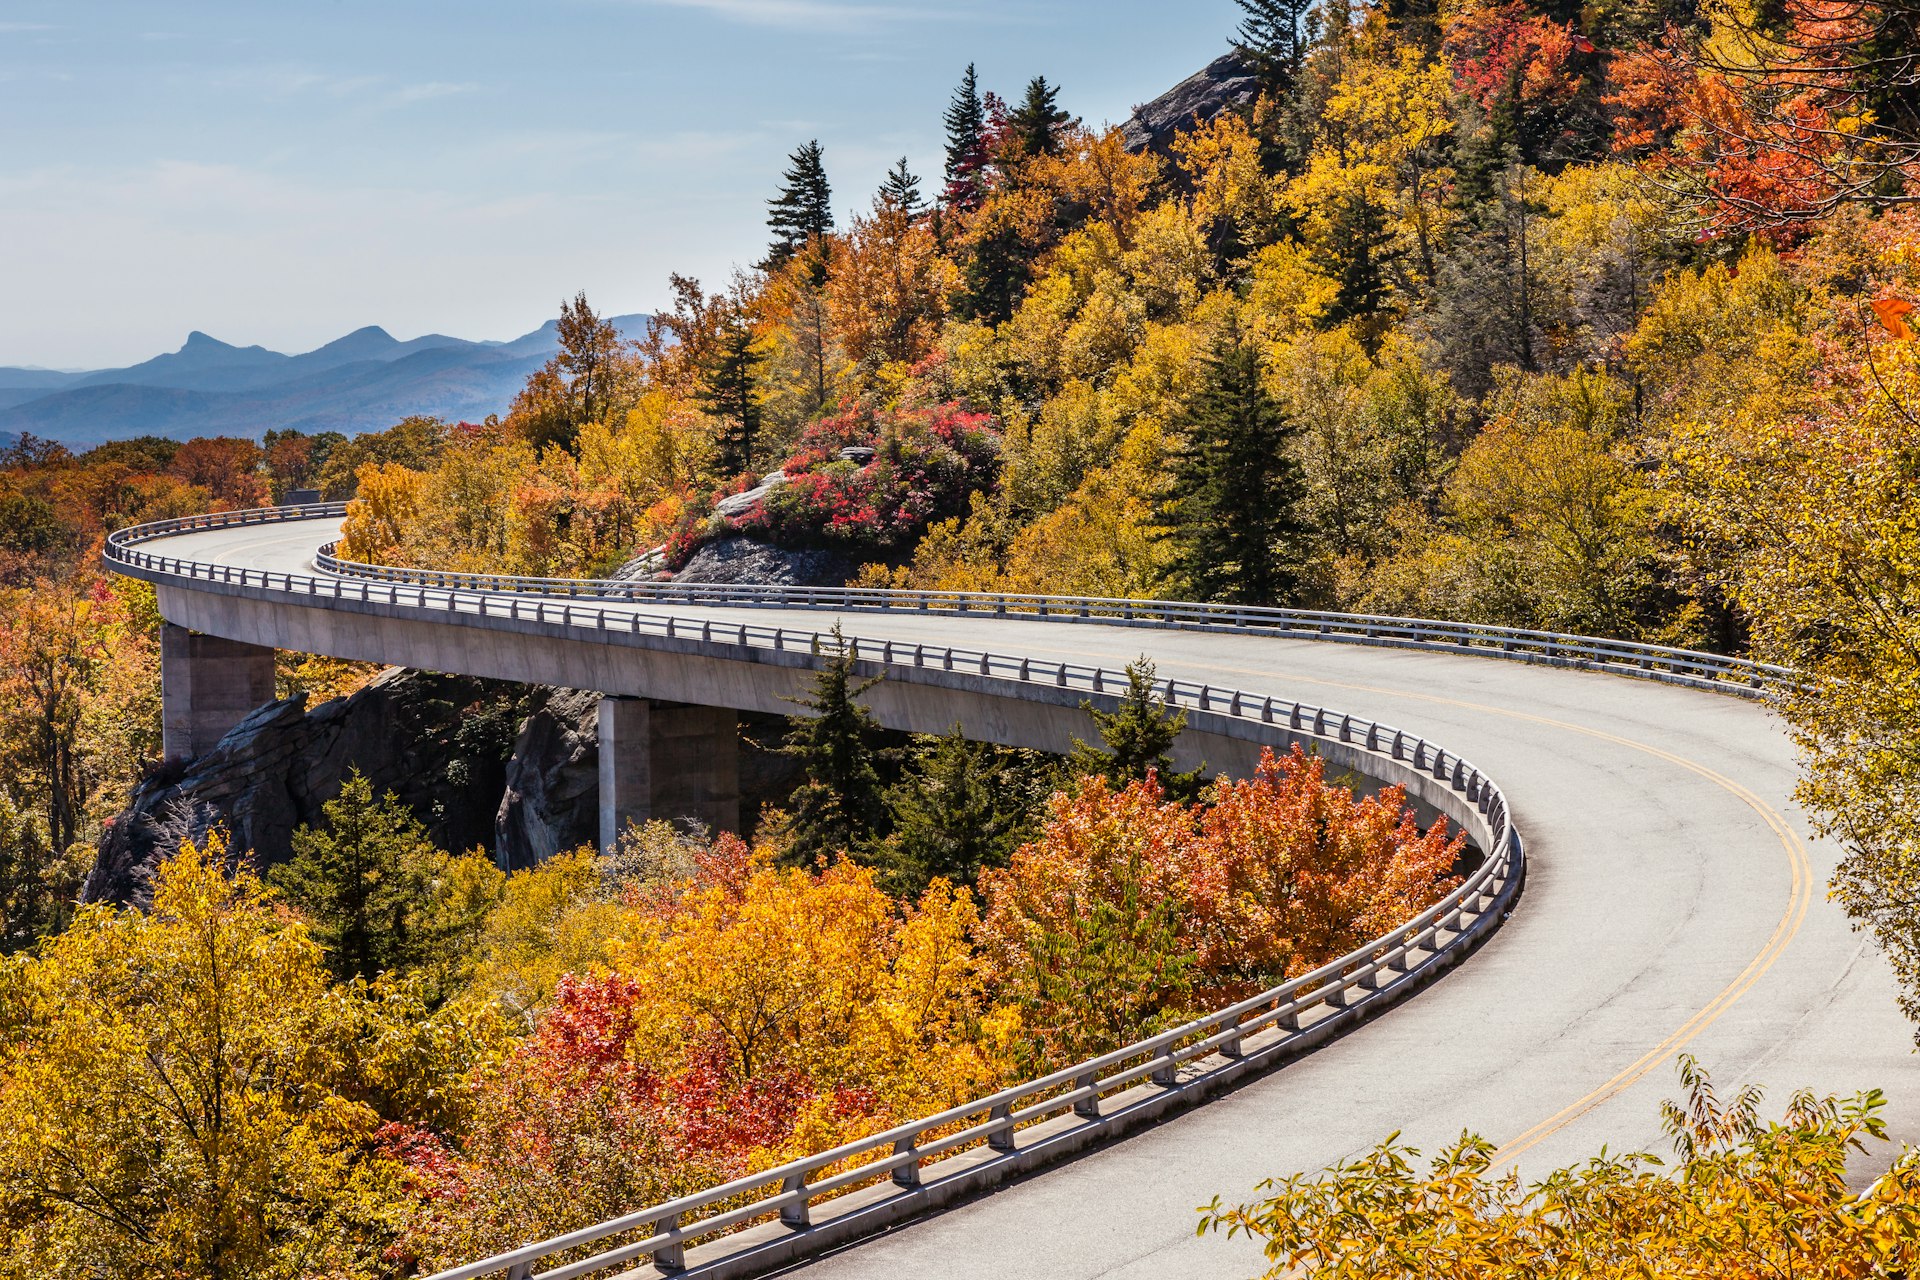 The winding road of Blue Ridge Parkway, Virginia, during fall